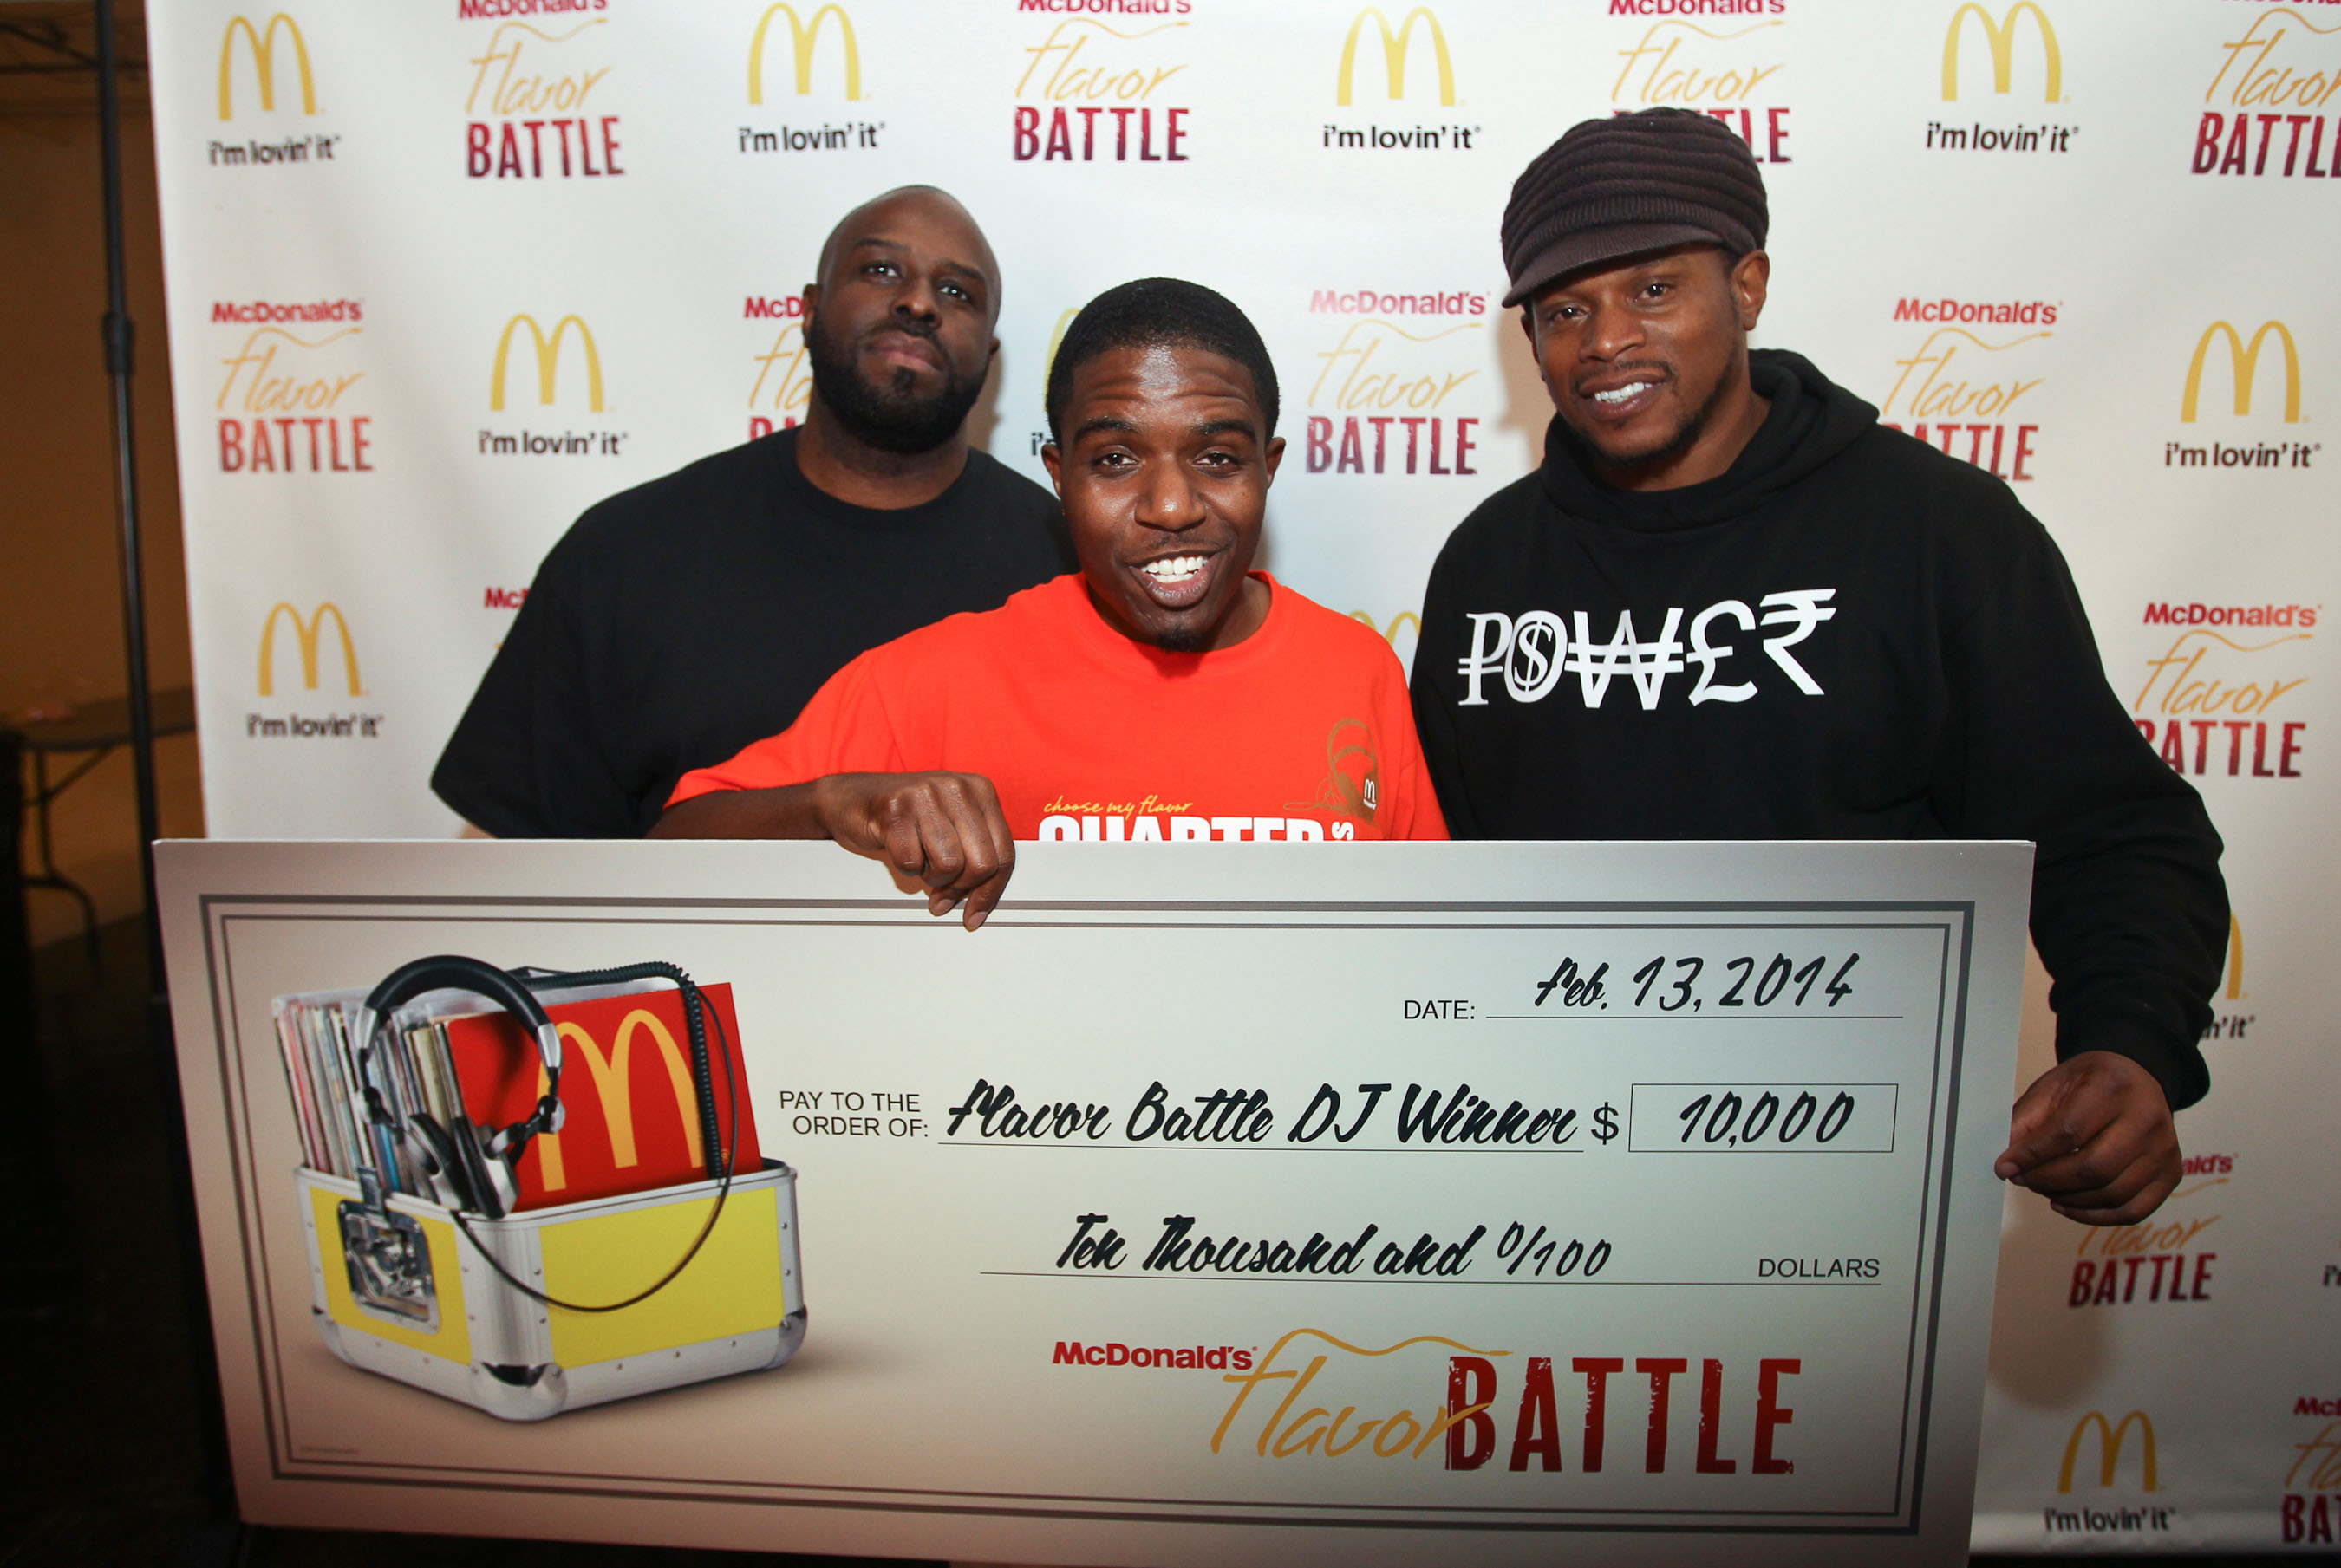 2014 McDonald's Flavor Battle champion, DJ R-Tistic of Los Angeles, celebrates his win with show host, DJ Funkmaster Flex, and social media correspondent, TV/radio personality, Sway Calloway. McDonald's Flavor Battle is a national online DJ competition that showcases some of America's hottest up-and-coming mix-masters. The competition began with 12 DJs with DJ R-Tistic edging out DJ Niena Drake of Chicago and DJ Erika B of Newport News, VA, before a panel of celebrity judges and online viewers. Watch the rebroadcast of the finale until March 30 on FlavorBattle.com. Photo credit: Soul Brother. (PRNewsFoto/McDonald's) (PRNewsFoto/MCDONALD'S)